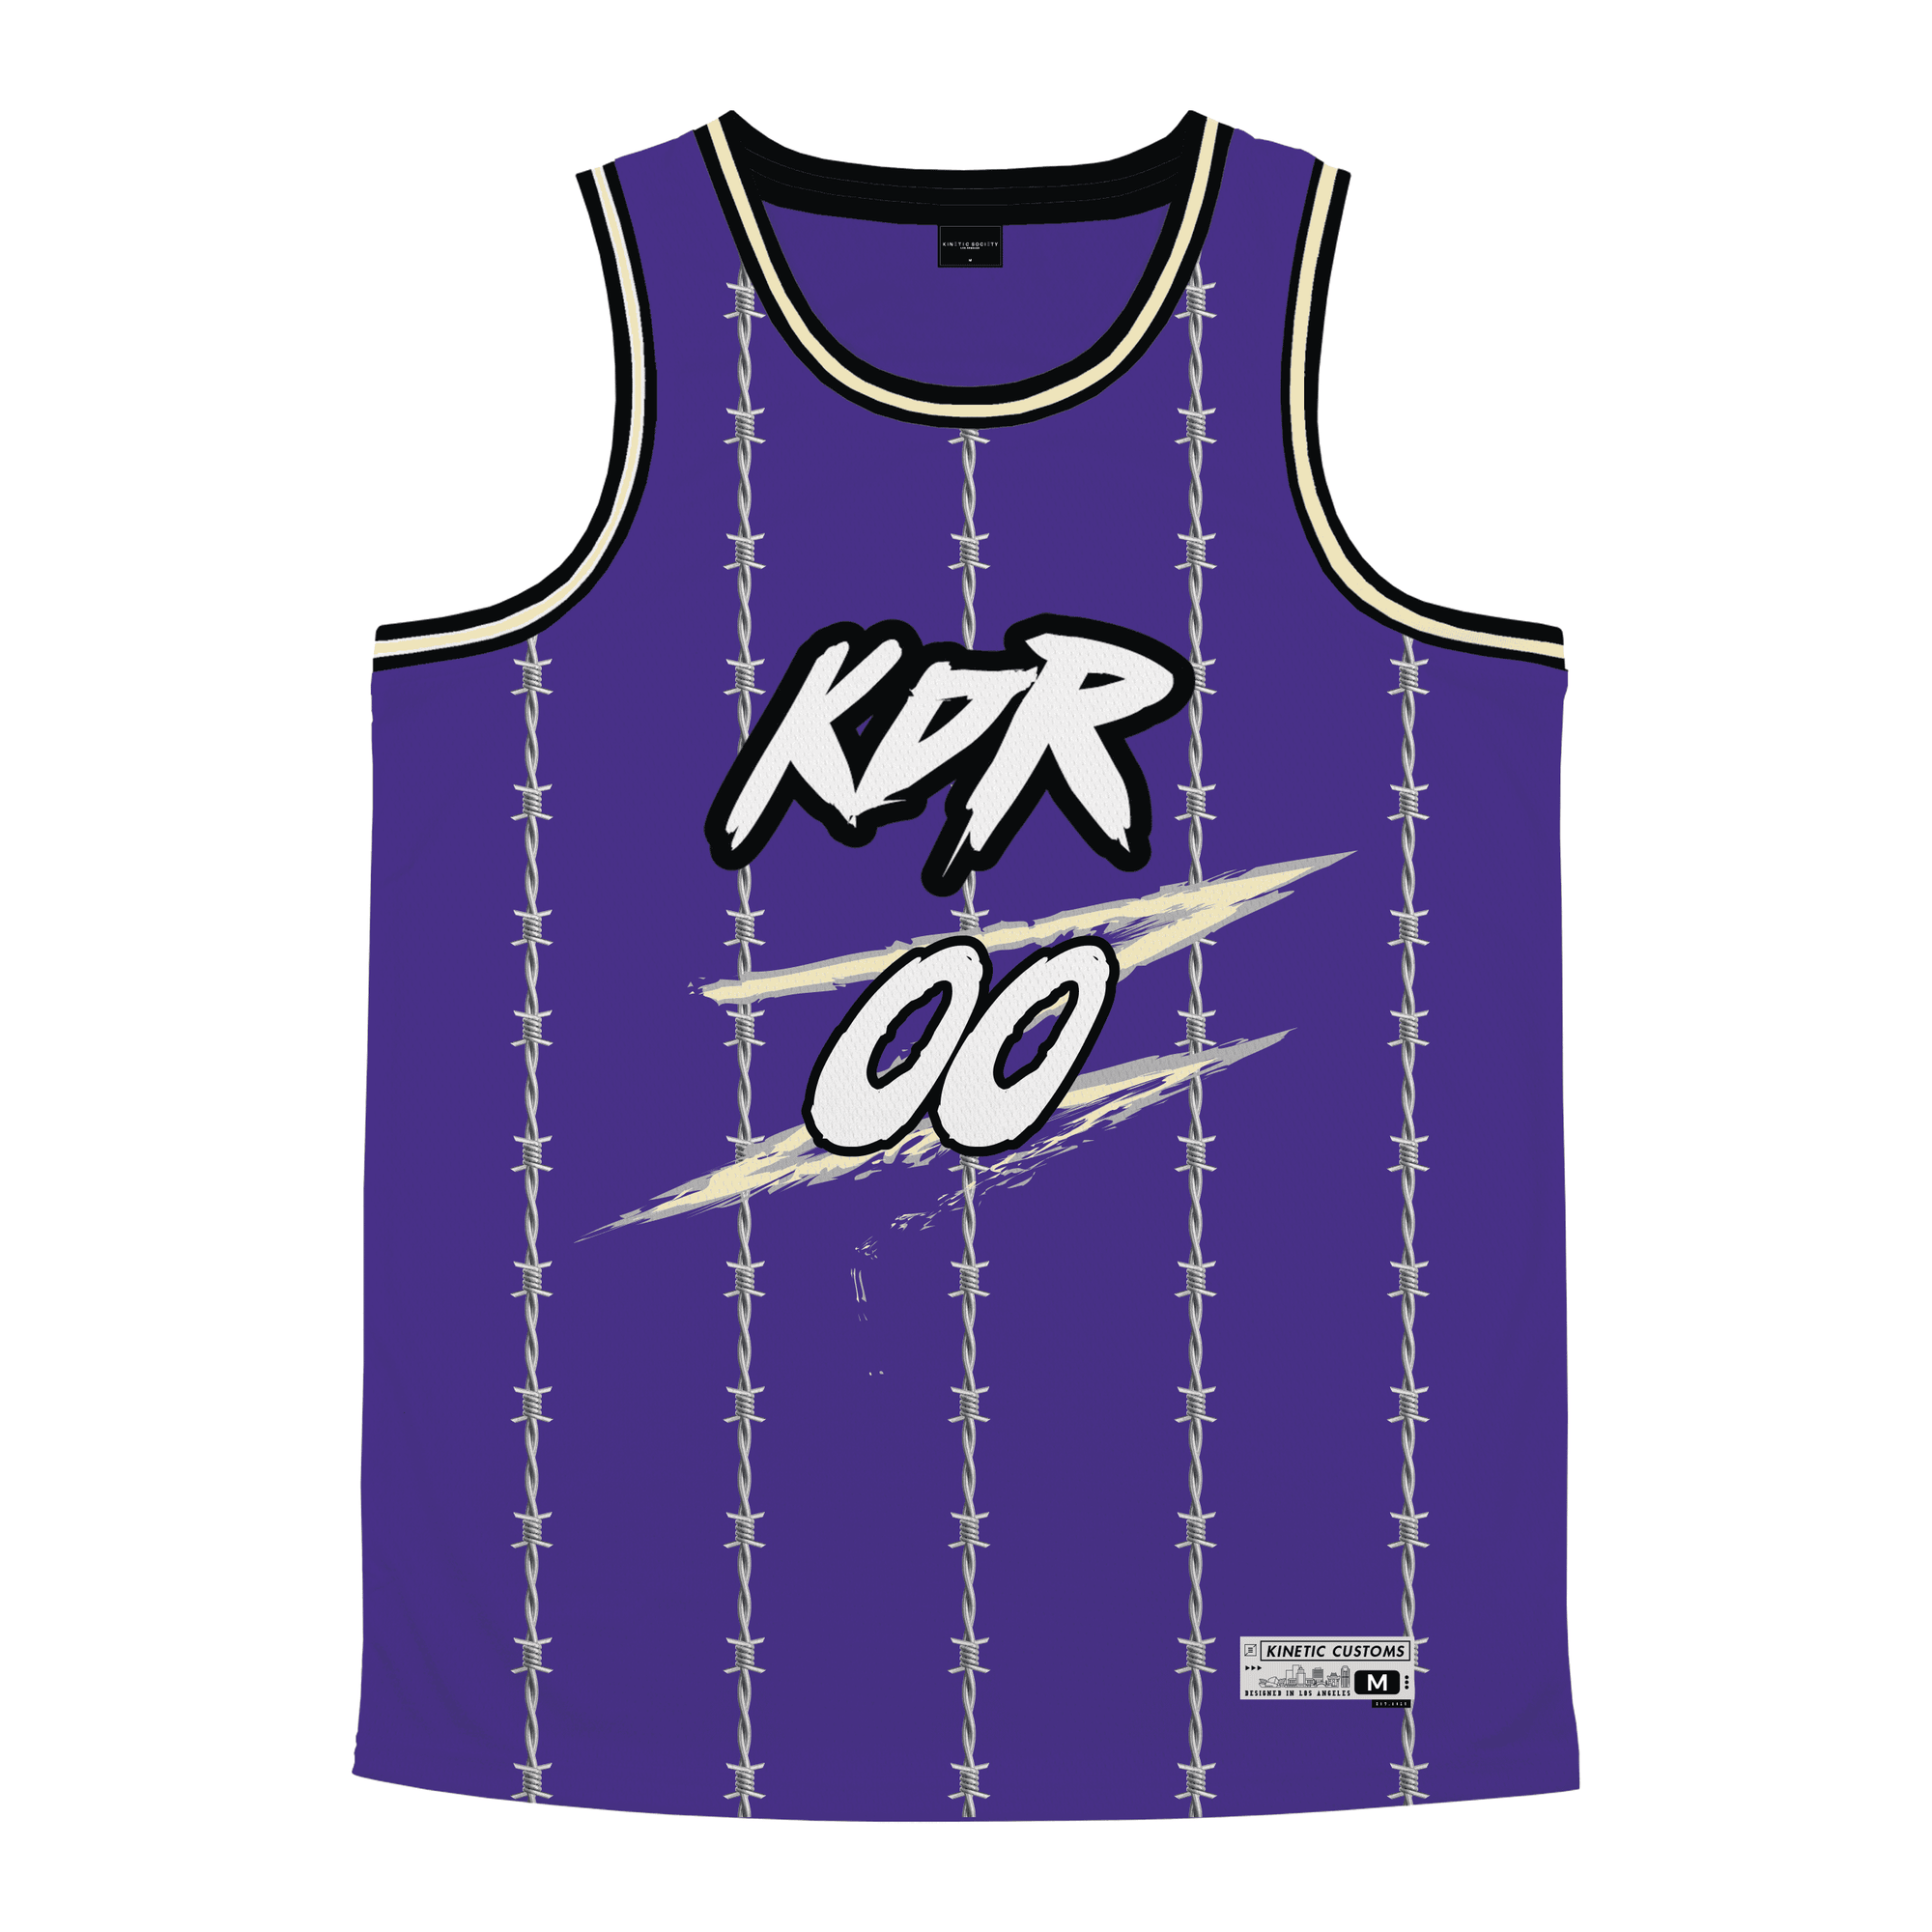 Kappa Delta Rho - Barbed Wire Basketball Jersey